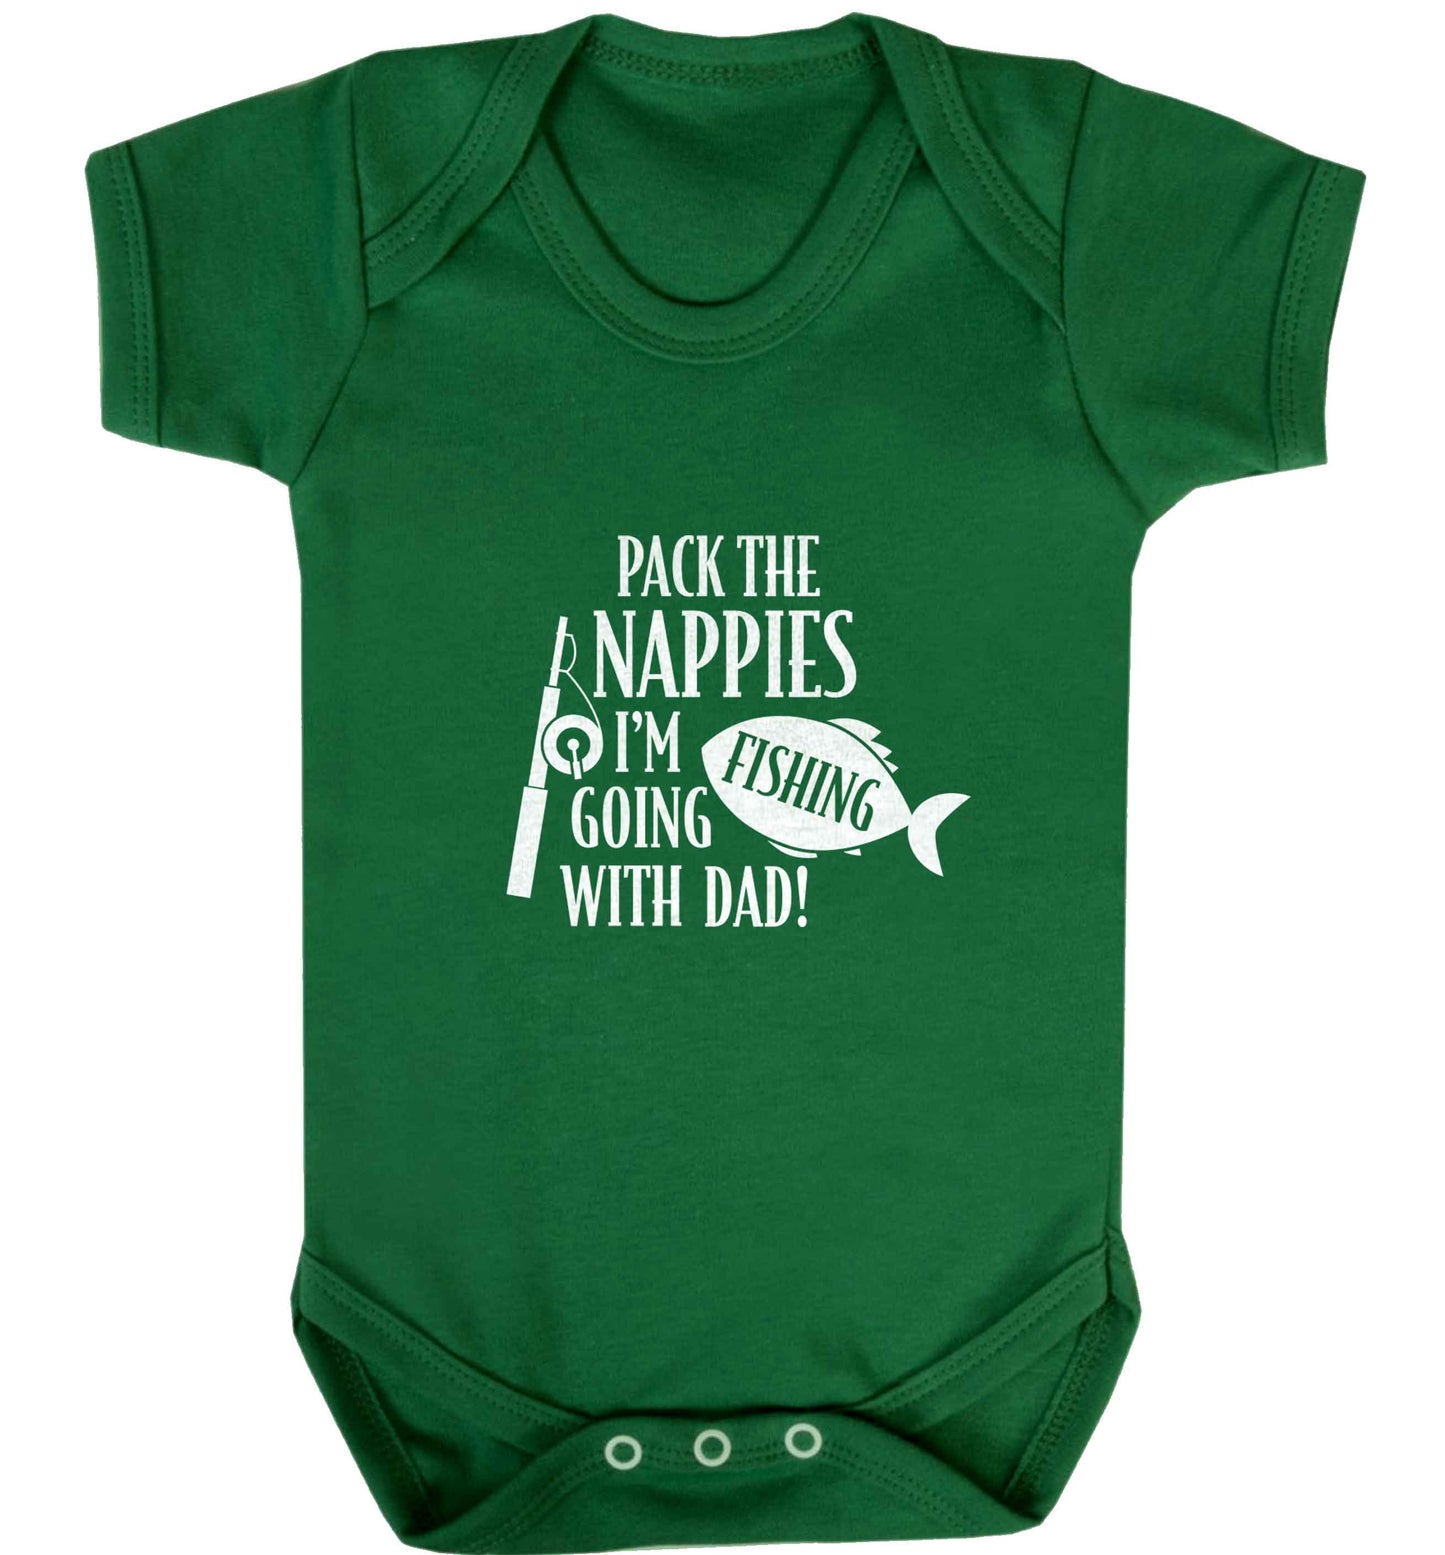 Pack the nappies I'm going fishing with Dad baby vest green 18-24 months